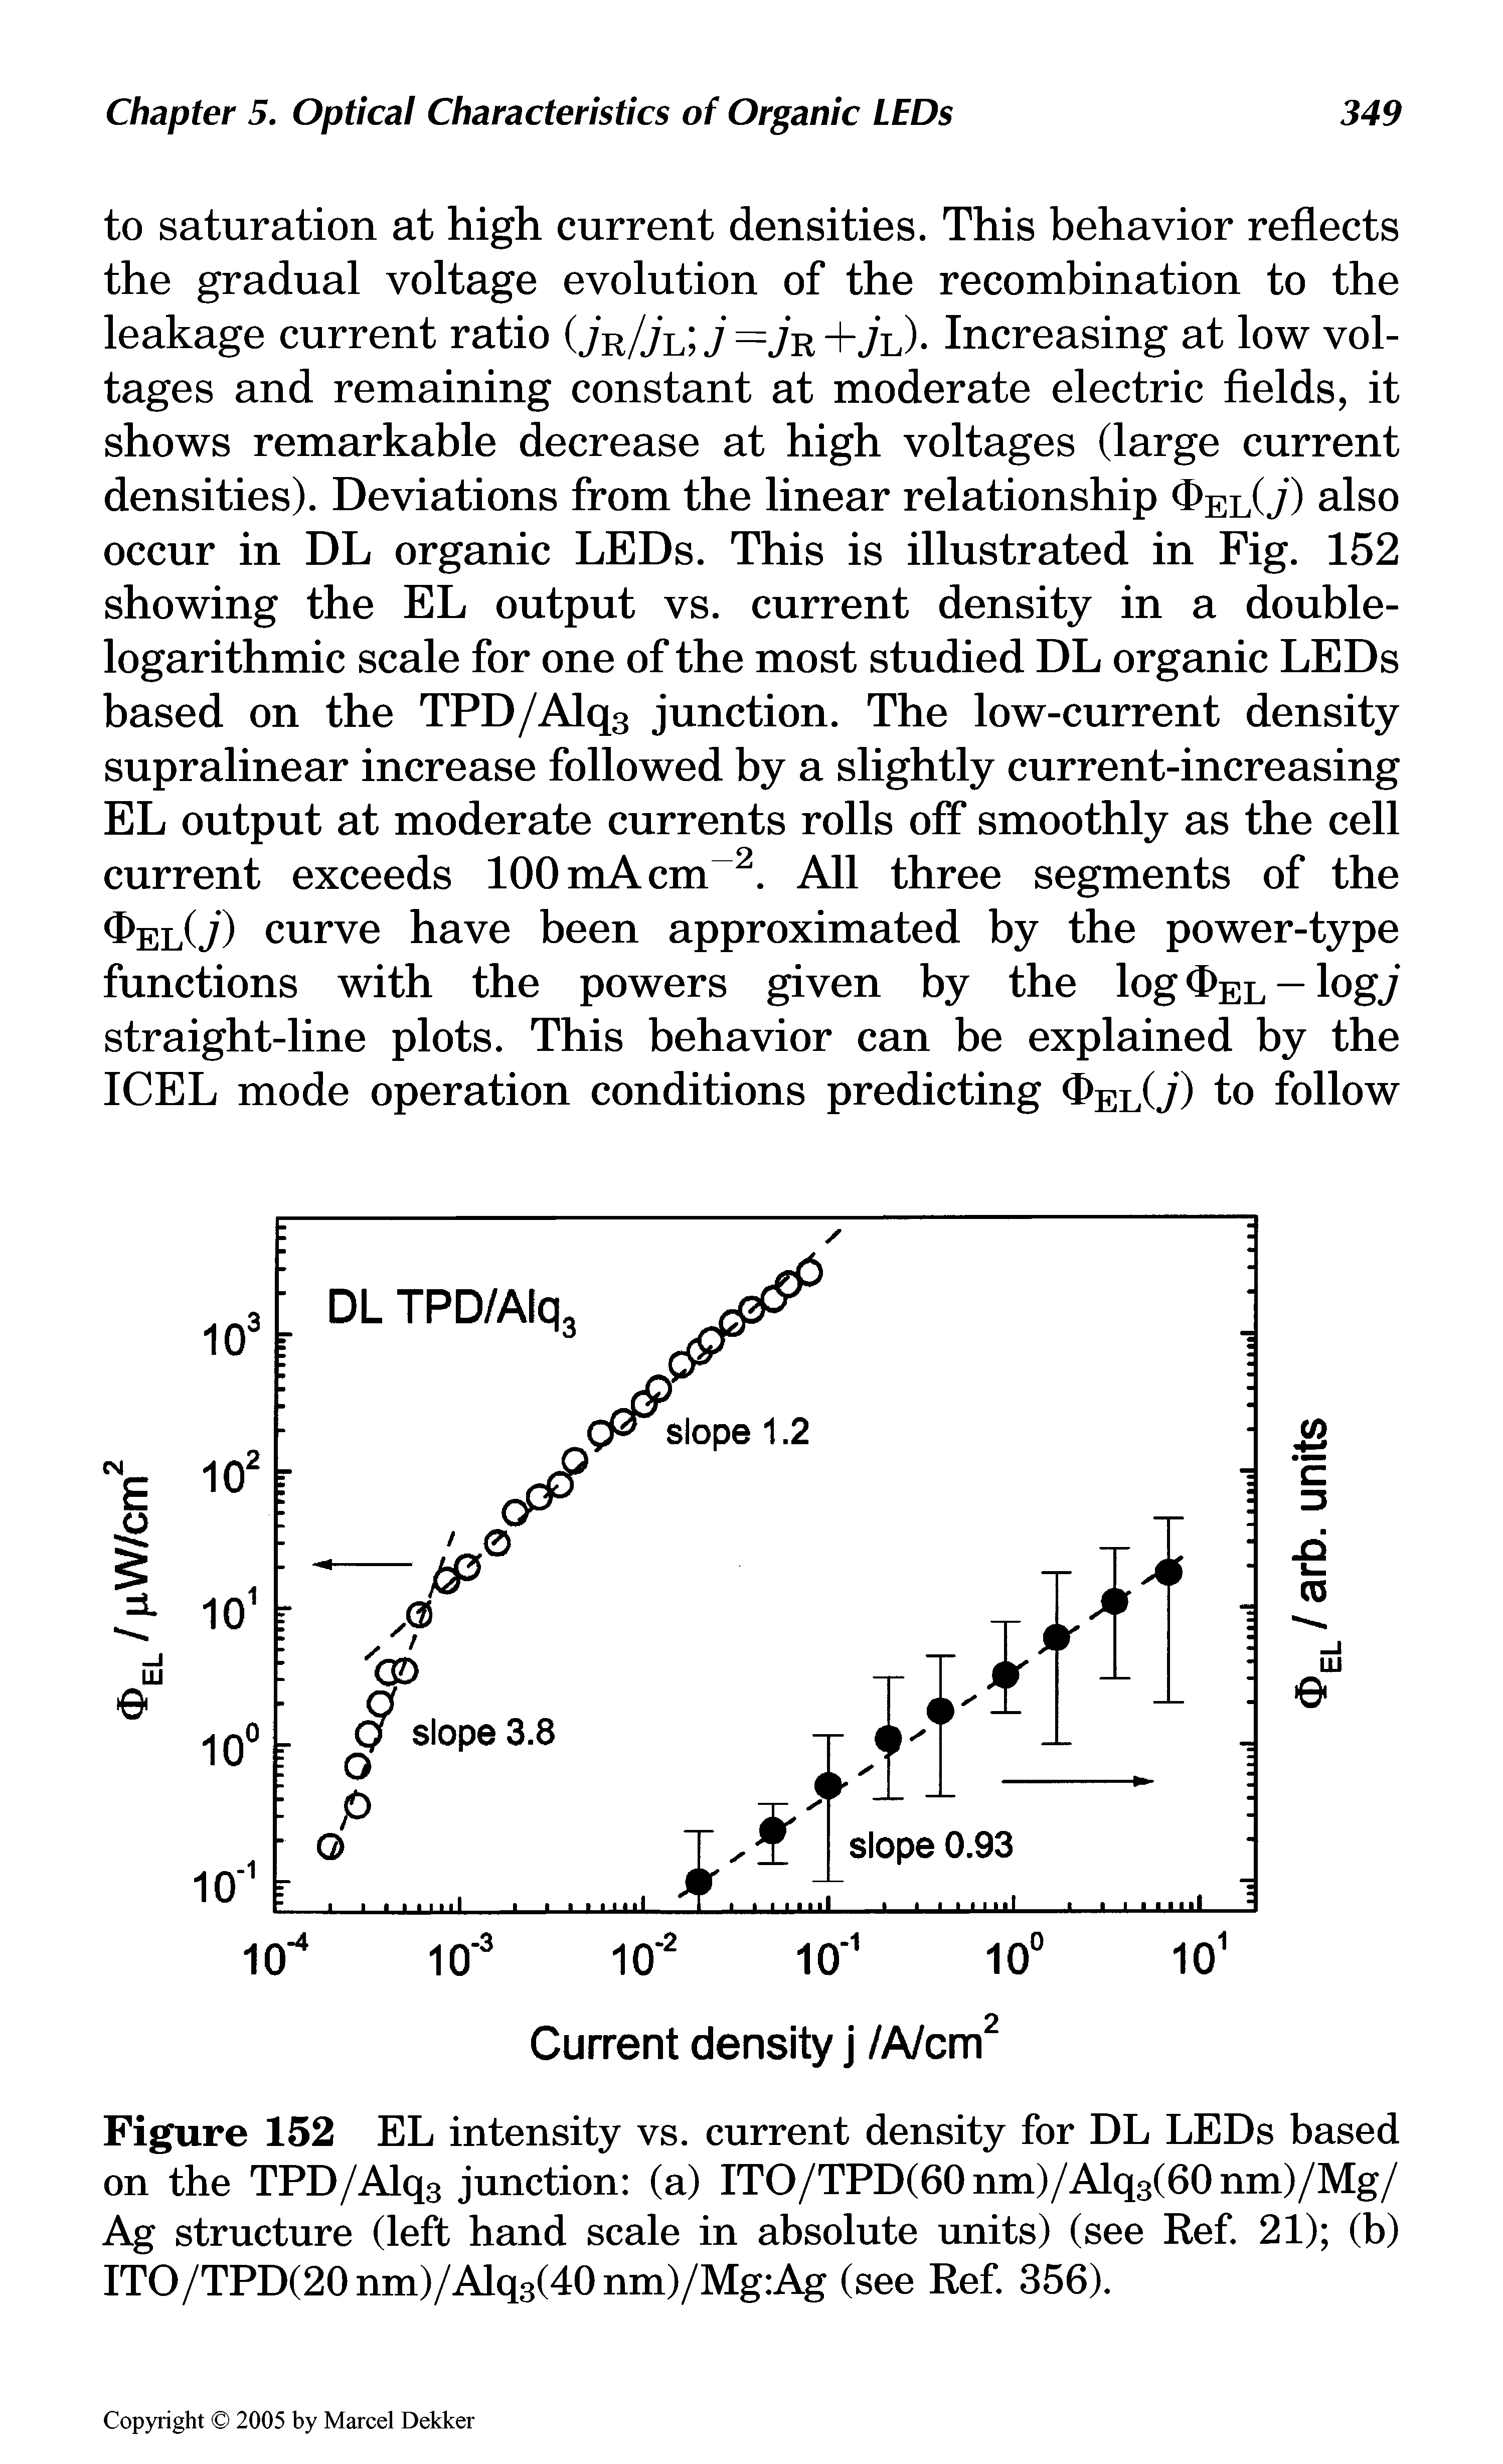 Figure 152 EL intensity vs. current density for DL LEDs based on the TPD/Alq3 junction (a) ITO/TPD(60nm)/ALq3(60nm)/Mg/ Ag structure (left hand scale in absolute units) (see Ref. 21) (b) ITO/TPD(20nm)/Alq3(40nm)/Mg Ag (see Ref. 356).